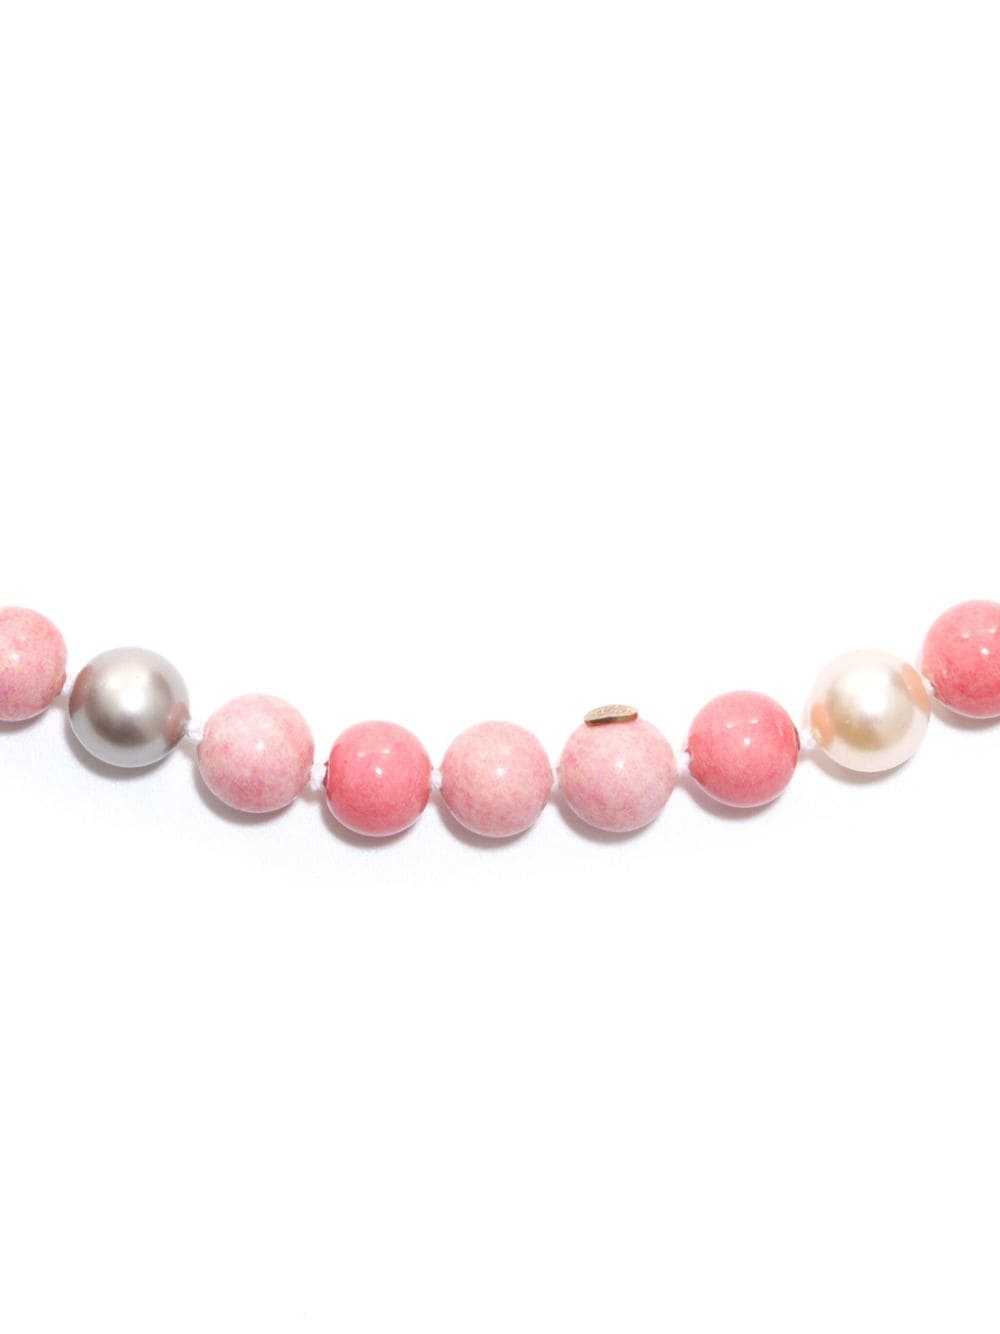 CHANEL Pre-Owned 2003 beaded stone necklace - Pink - image 2